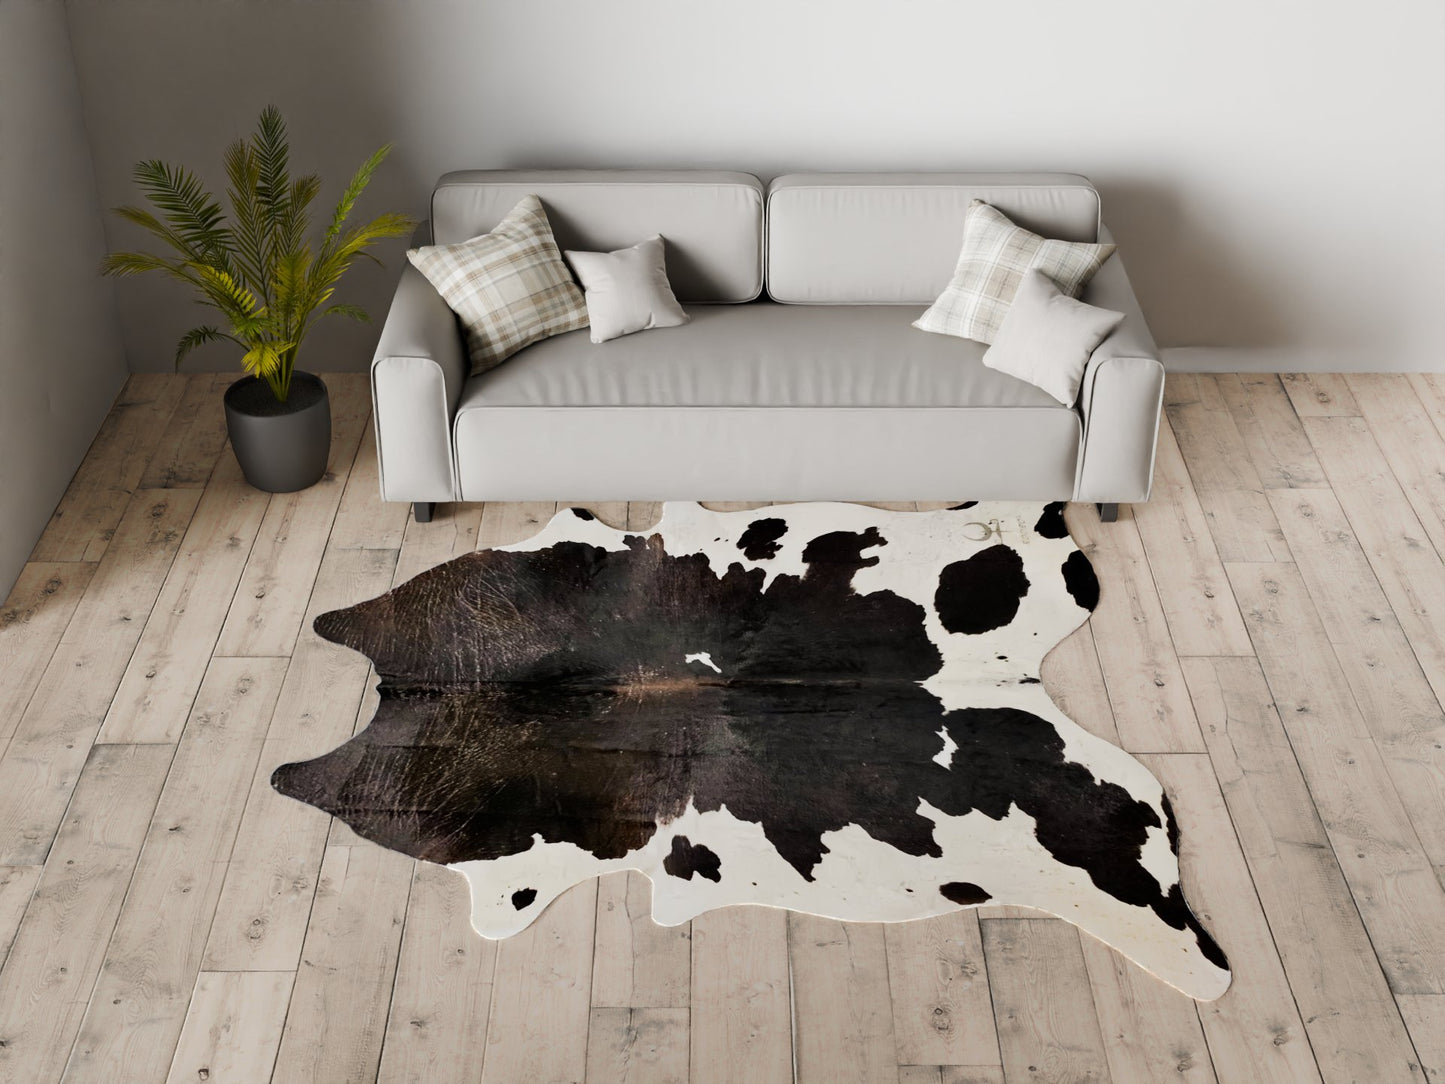 Black and White Cowhide Rug Size 6.6x8 ft---4666 - Rodeo Cowhide Rugs